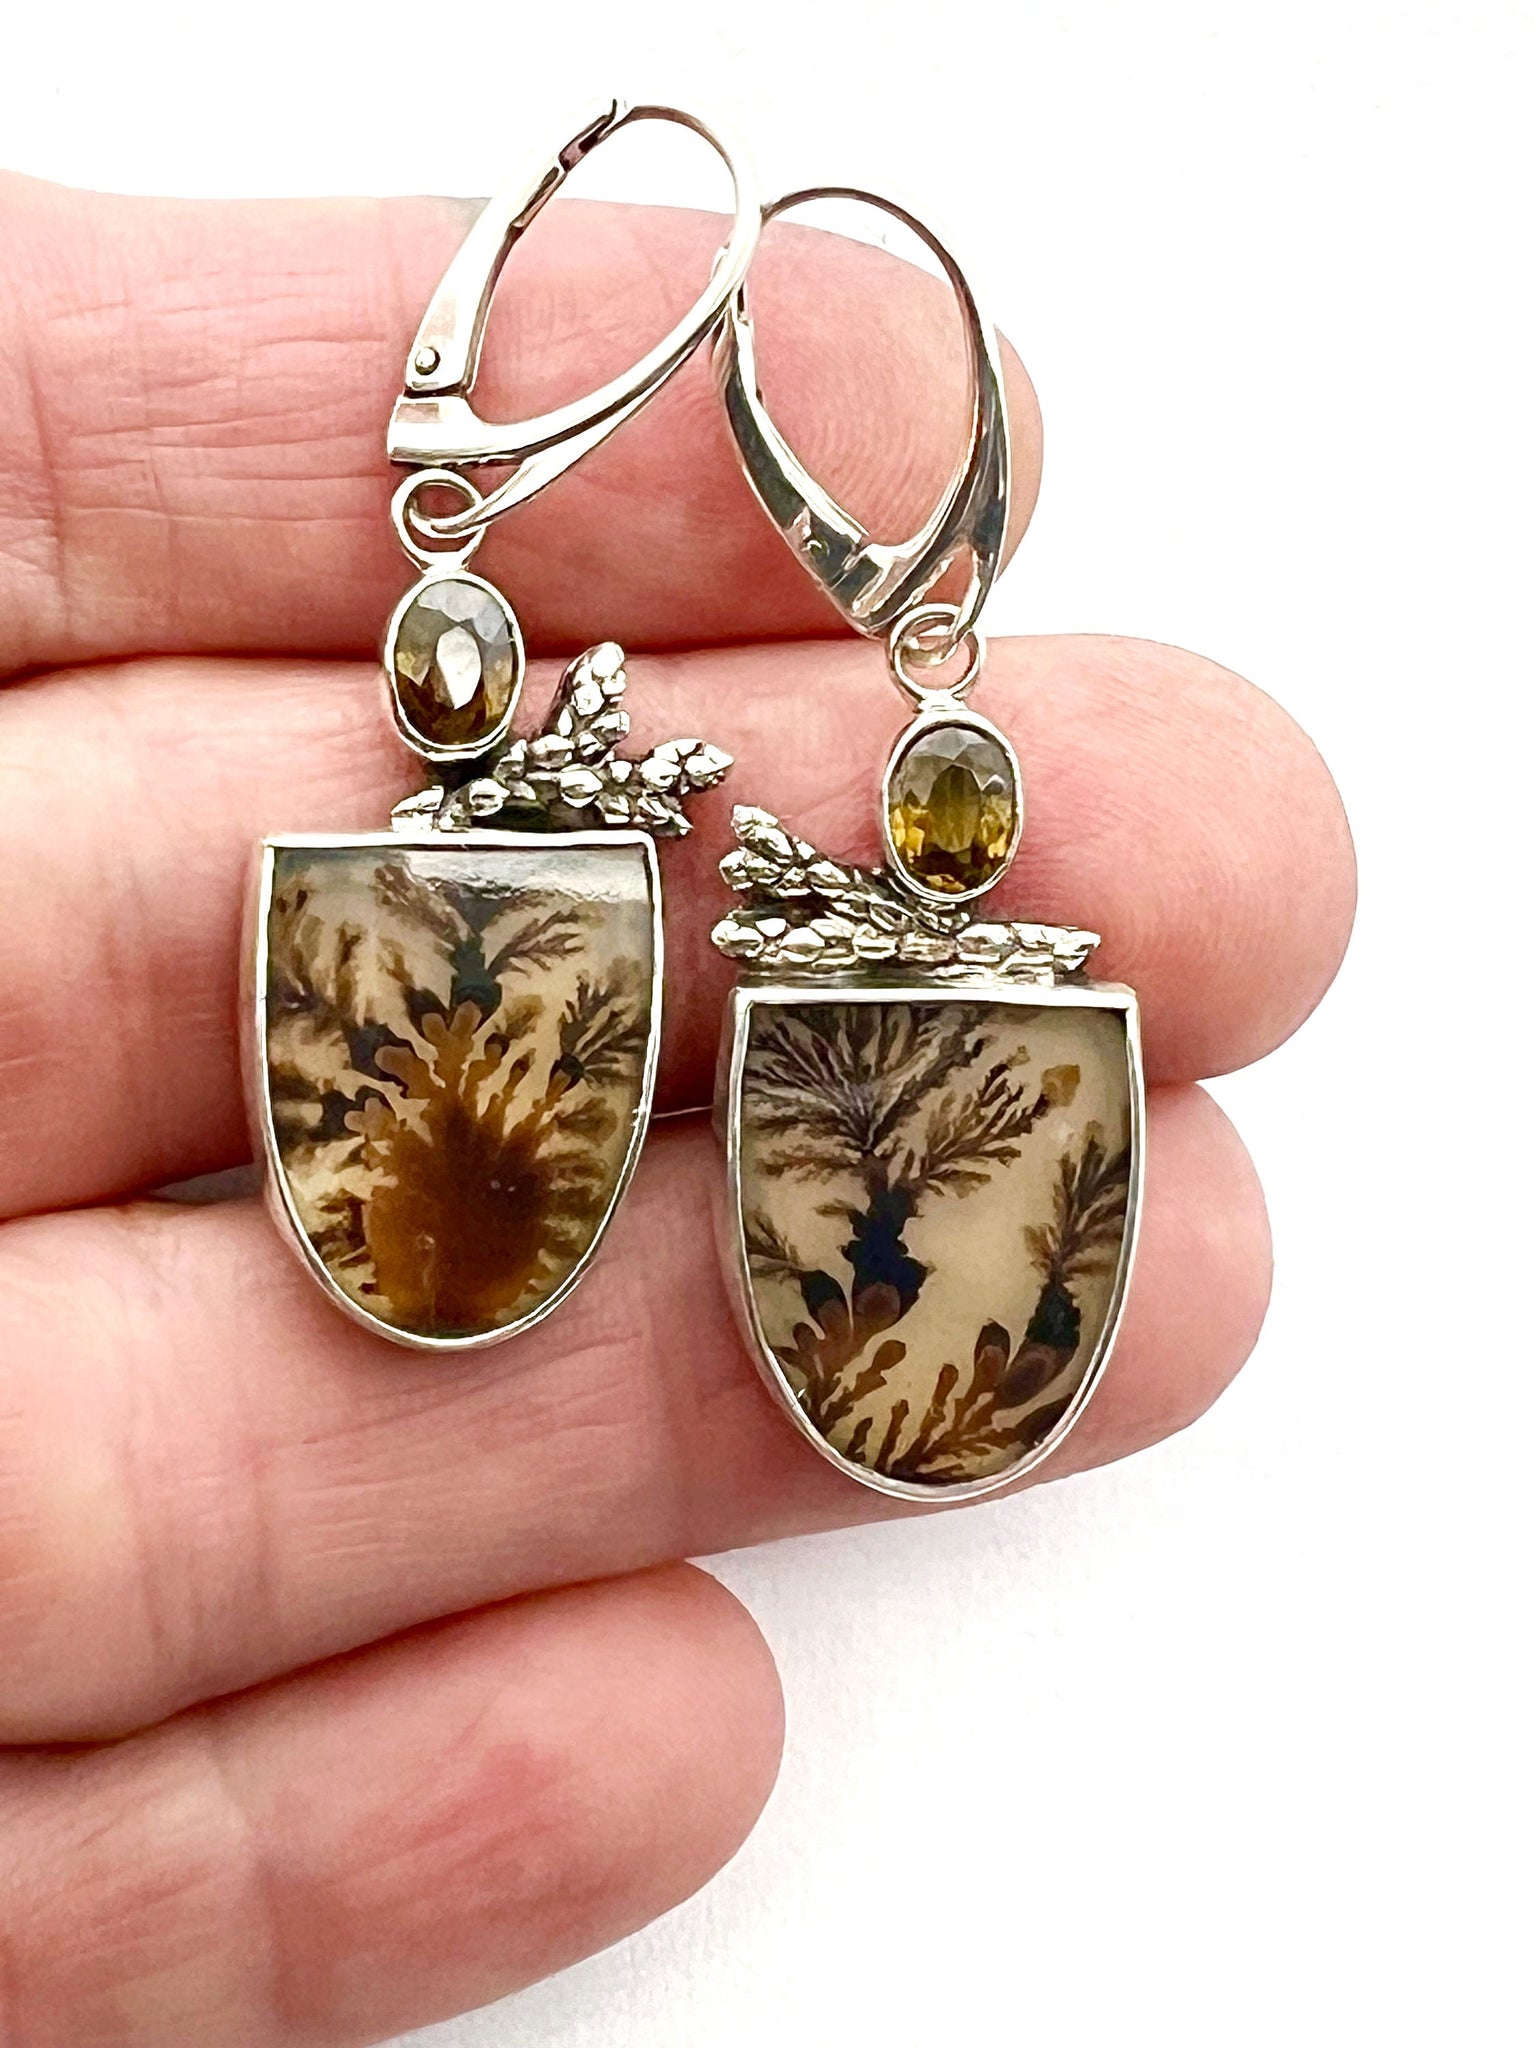 Dendritic Agate Earrings In Sterling Silver with Faceted Sphene, Unique Gemstone Earrings